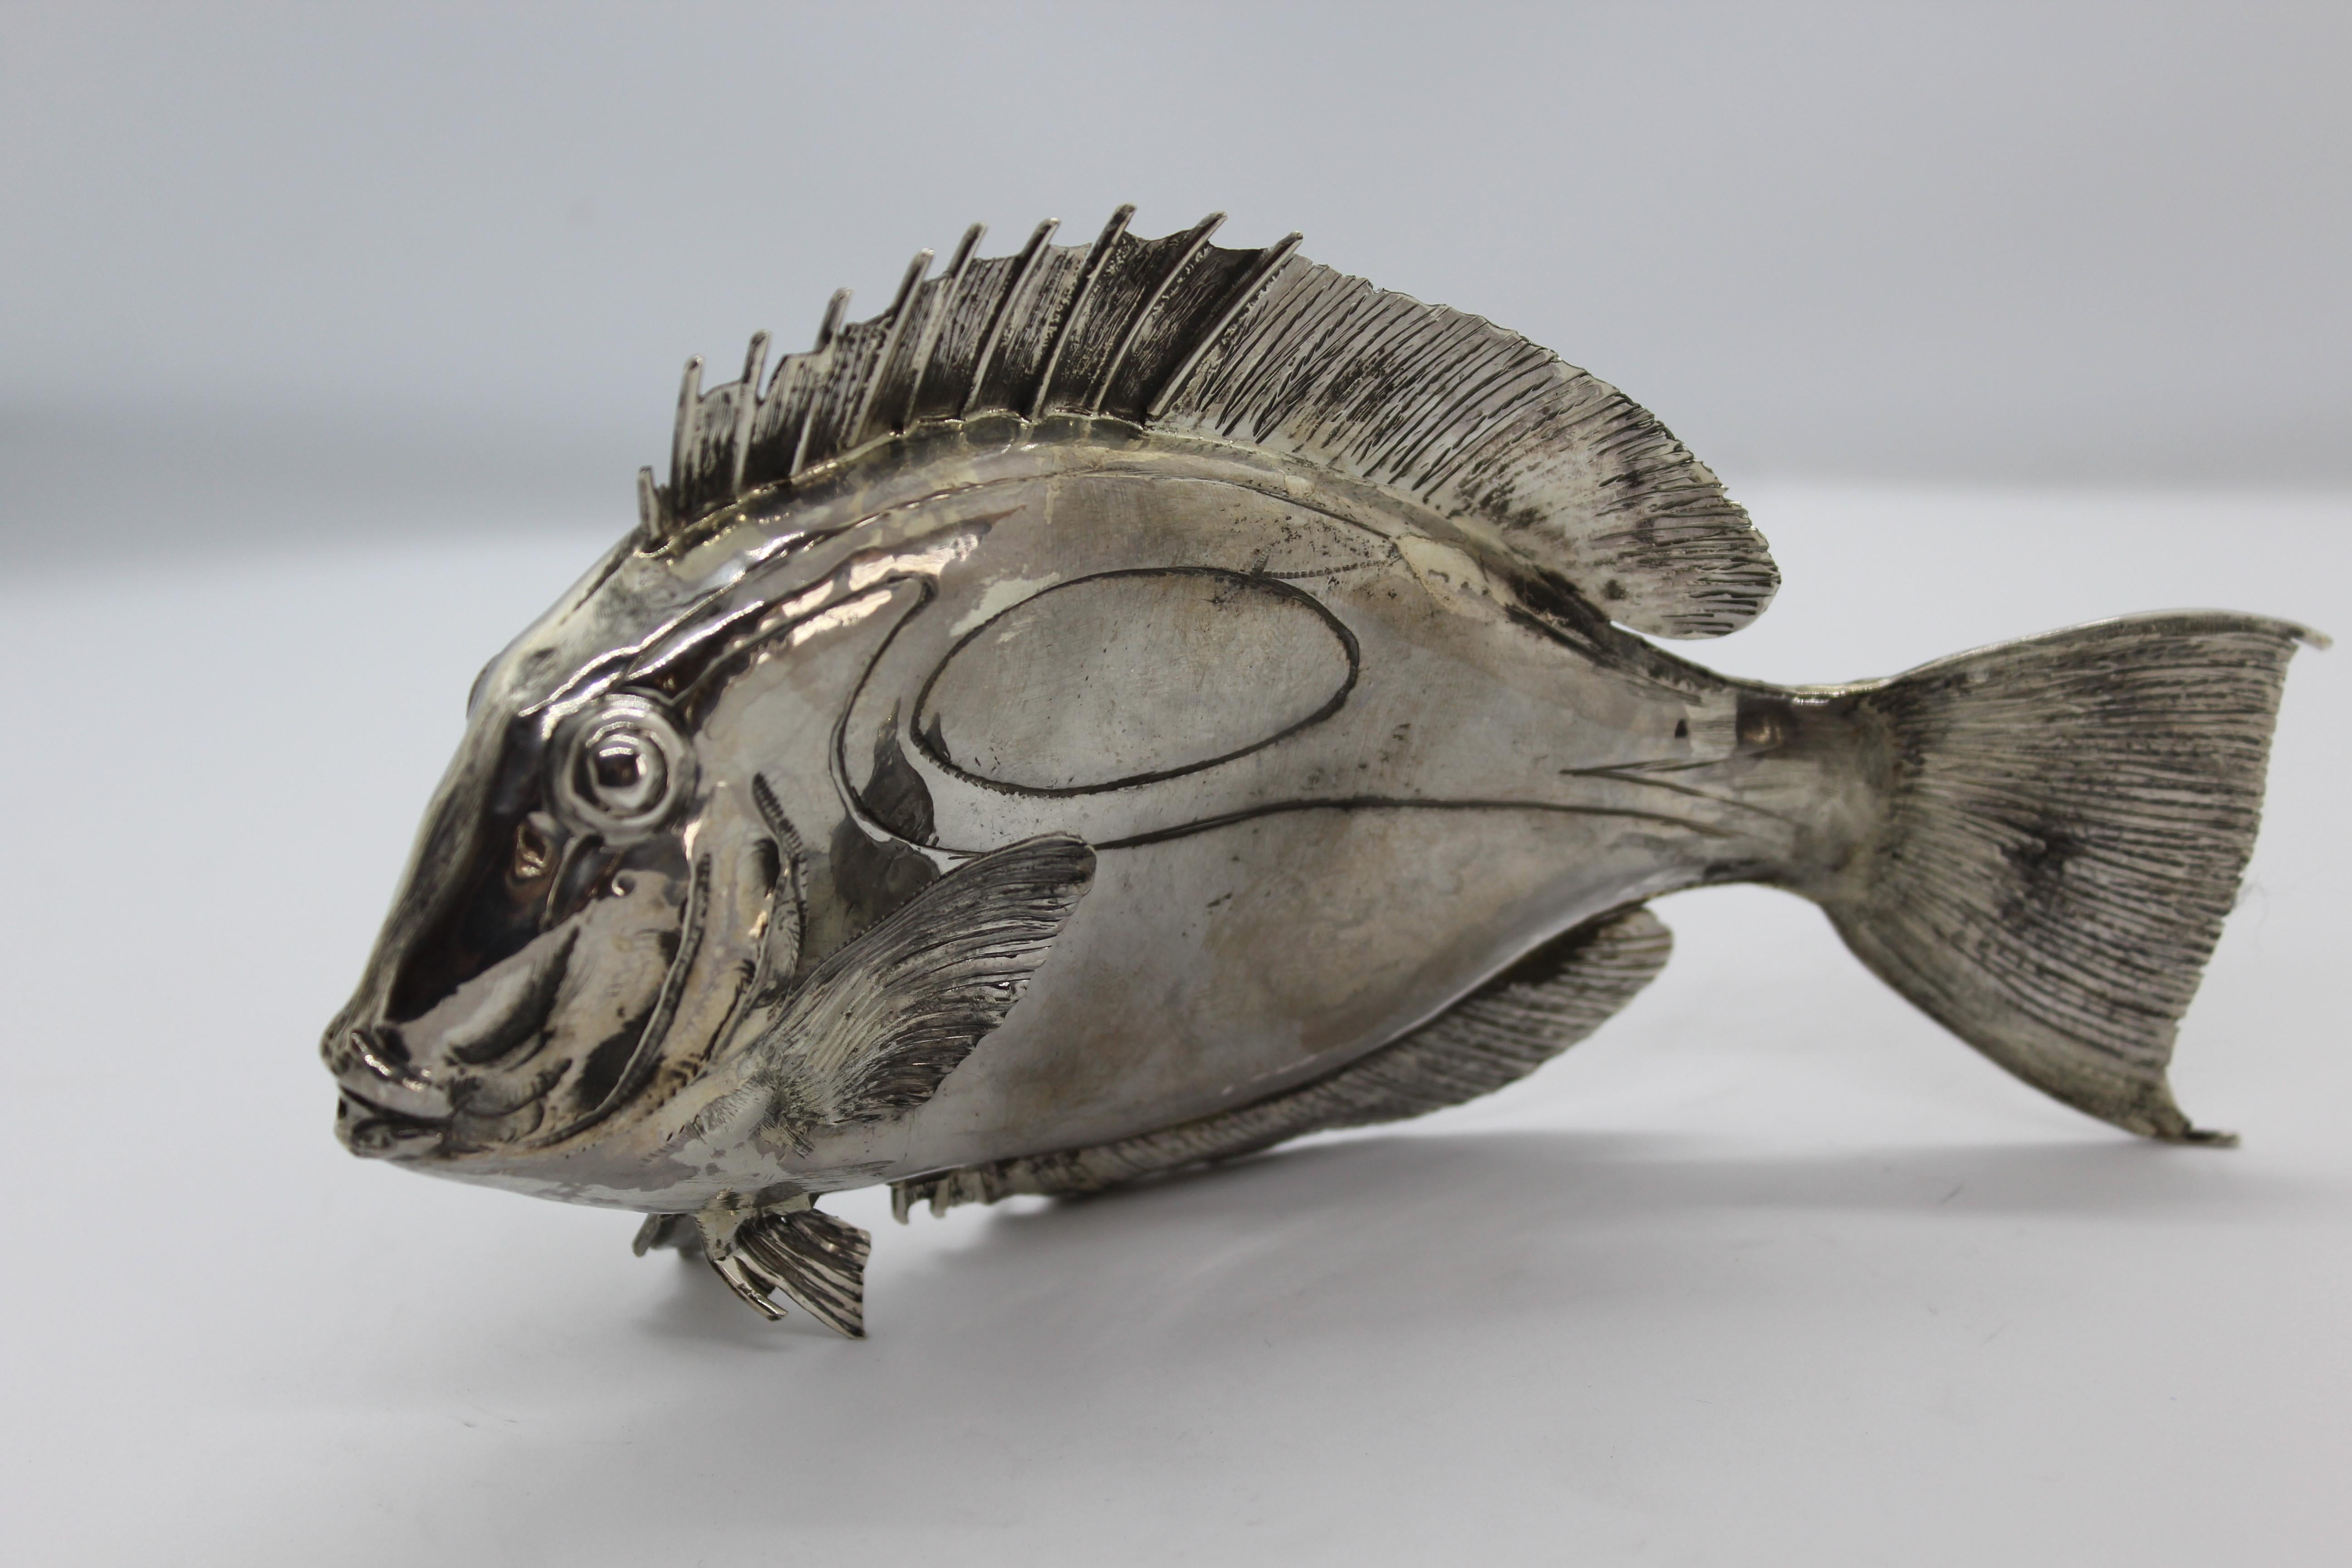 Doris Fish Silver Ornament is completely produced in Florence, Italy.
There are two models you can choose from.
Giuliano Foglia is the artist who chiselled this pure silver piece.

